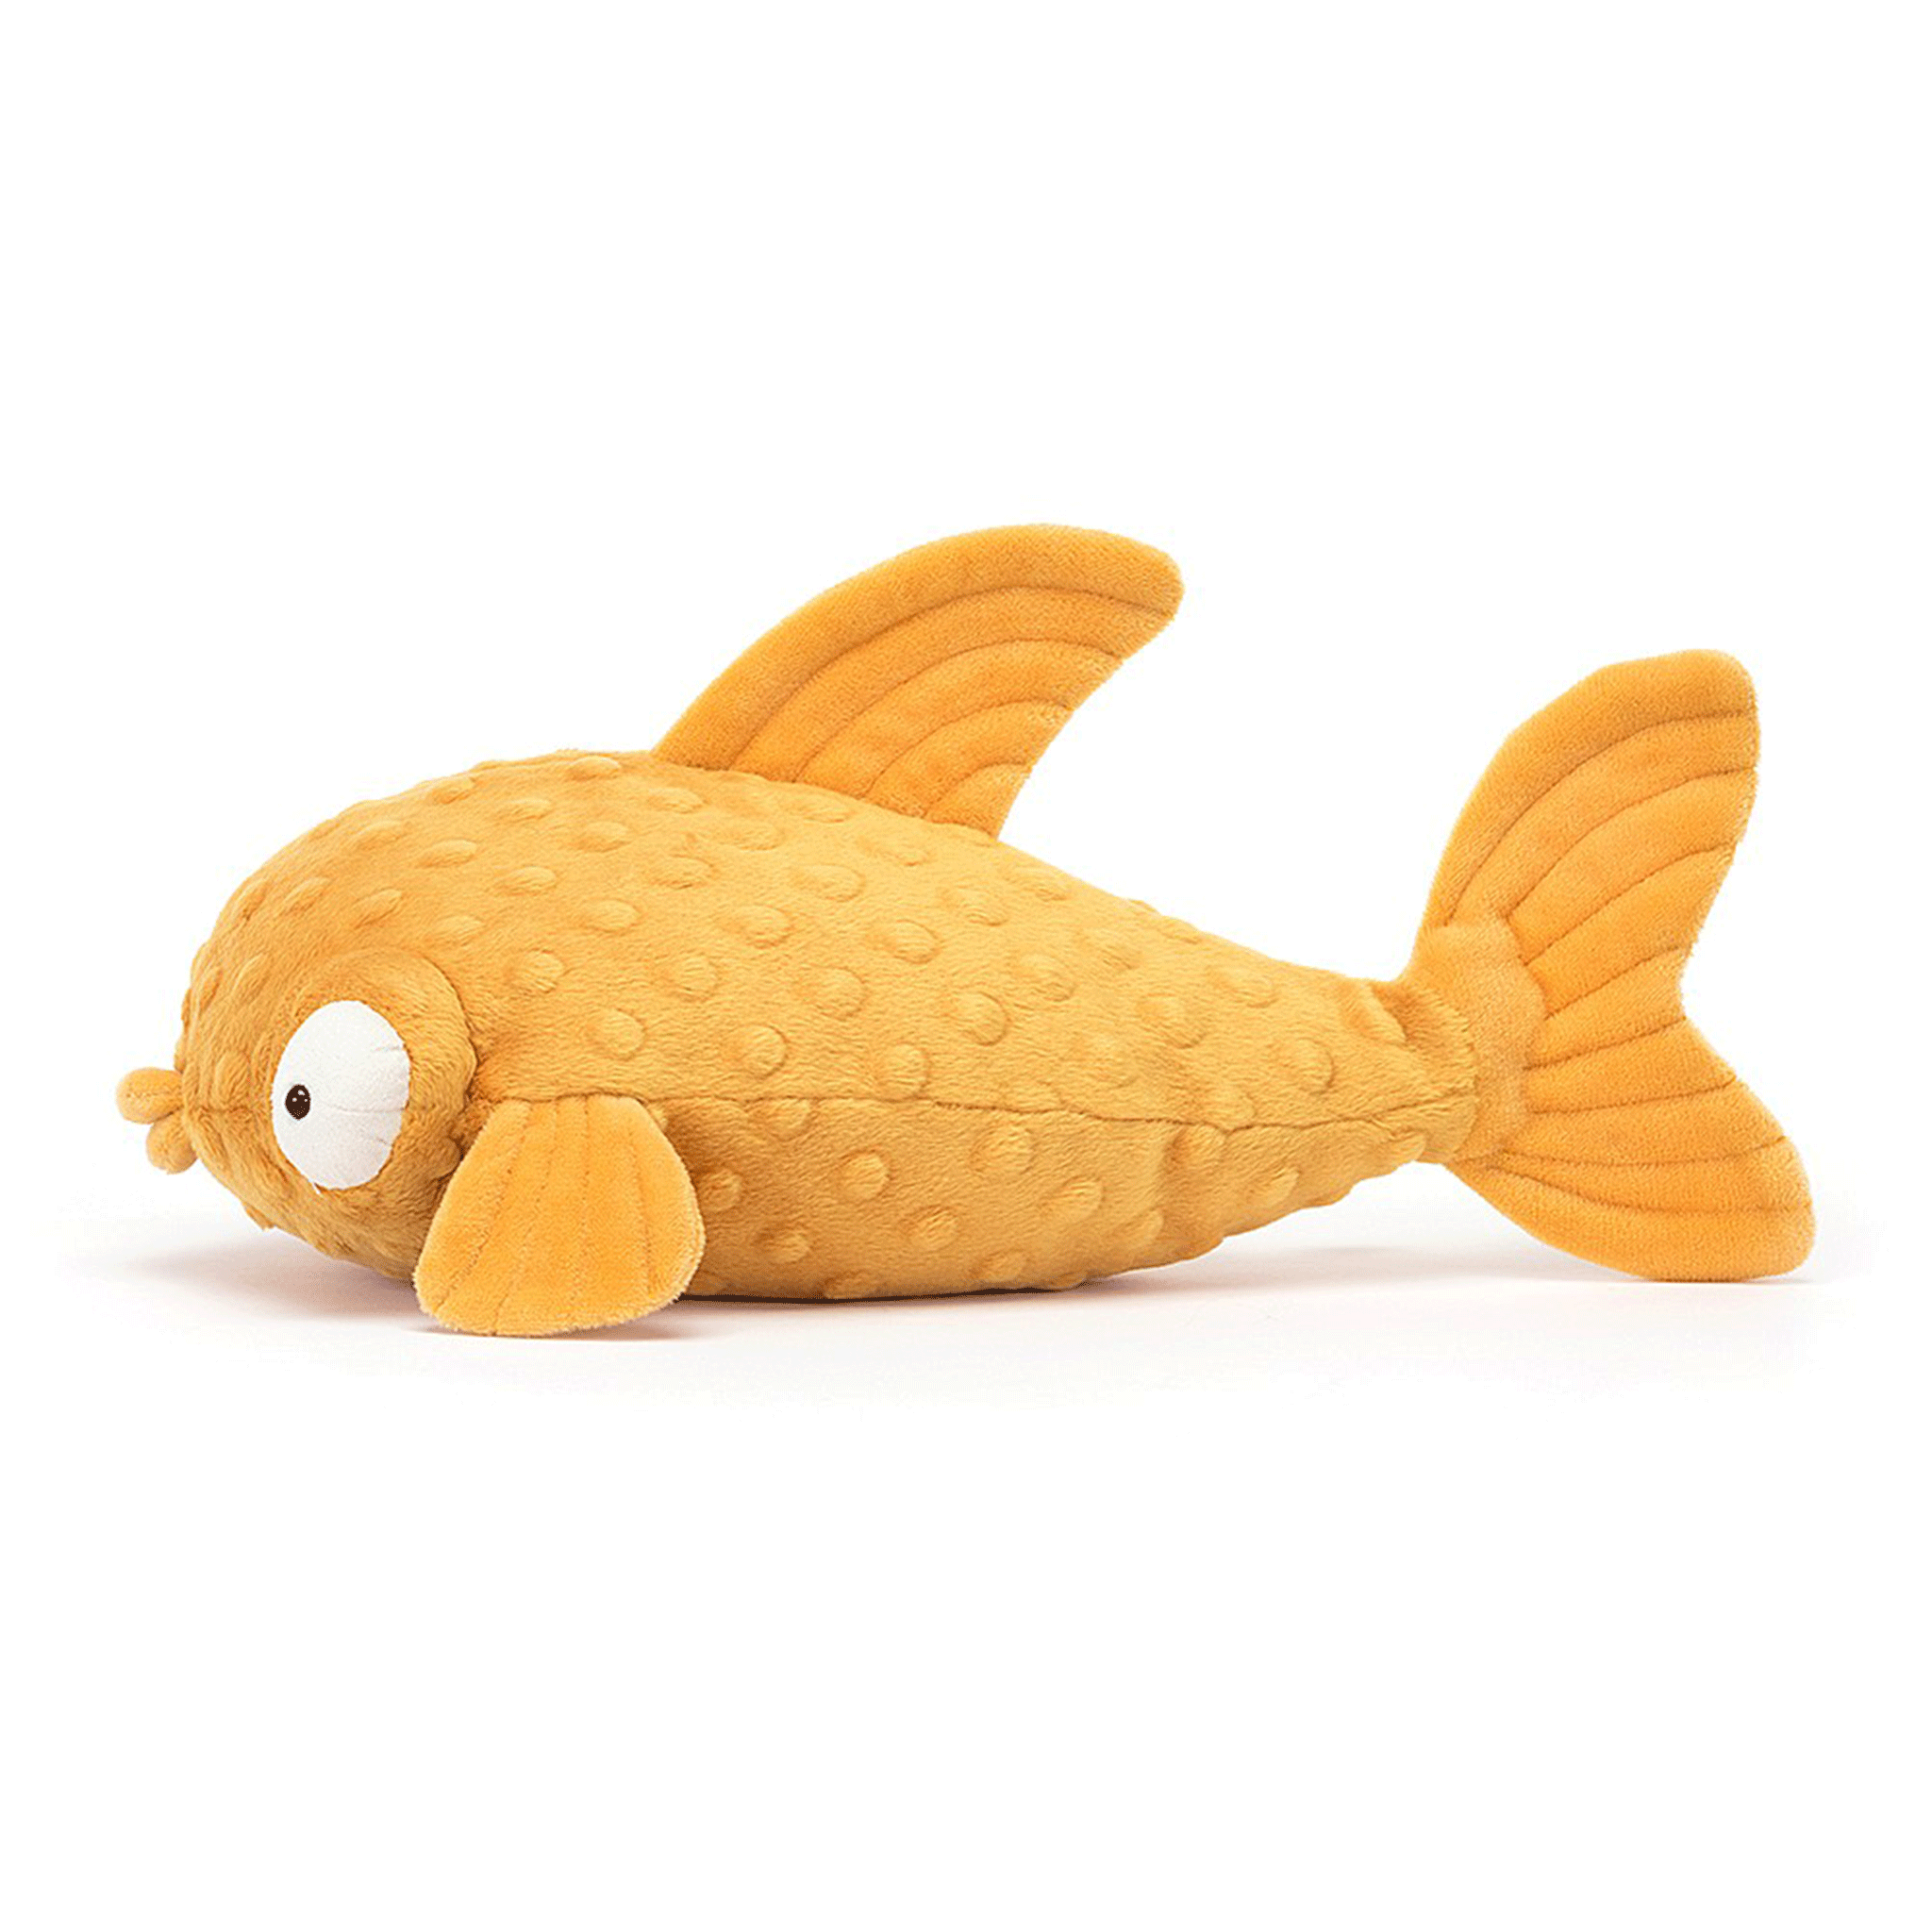 On a white background is a yellow stuffed toy fish with puffy eyes and lips.